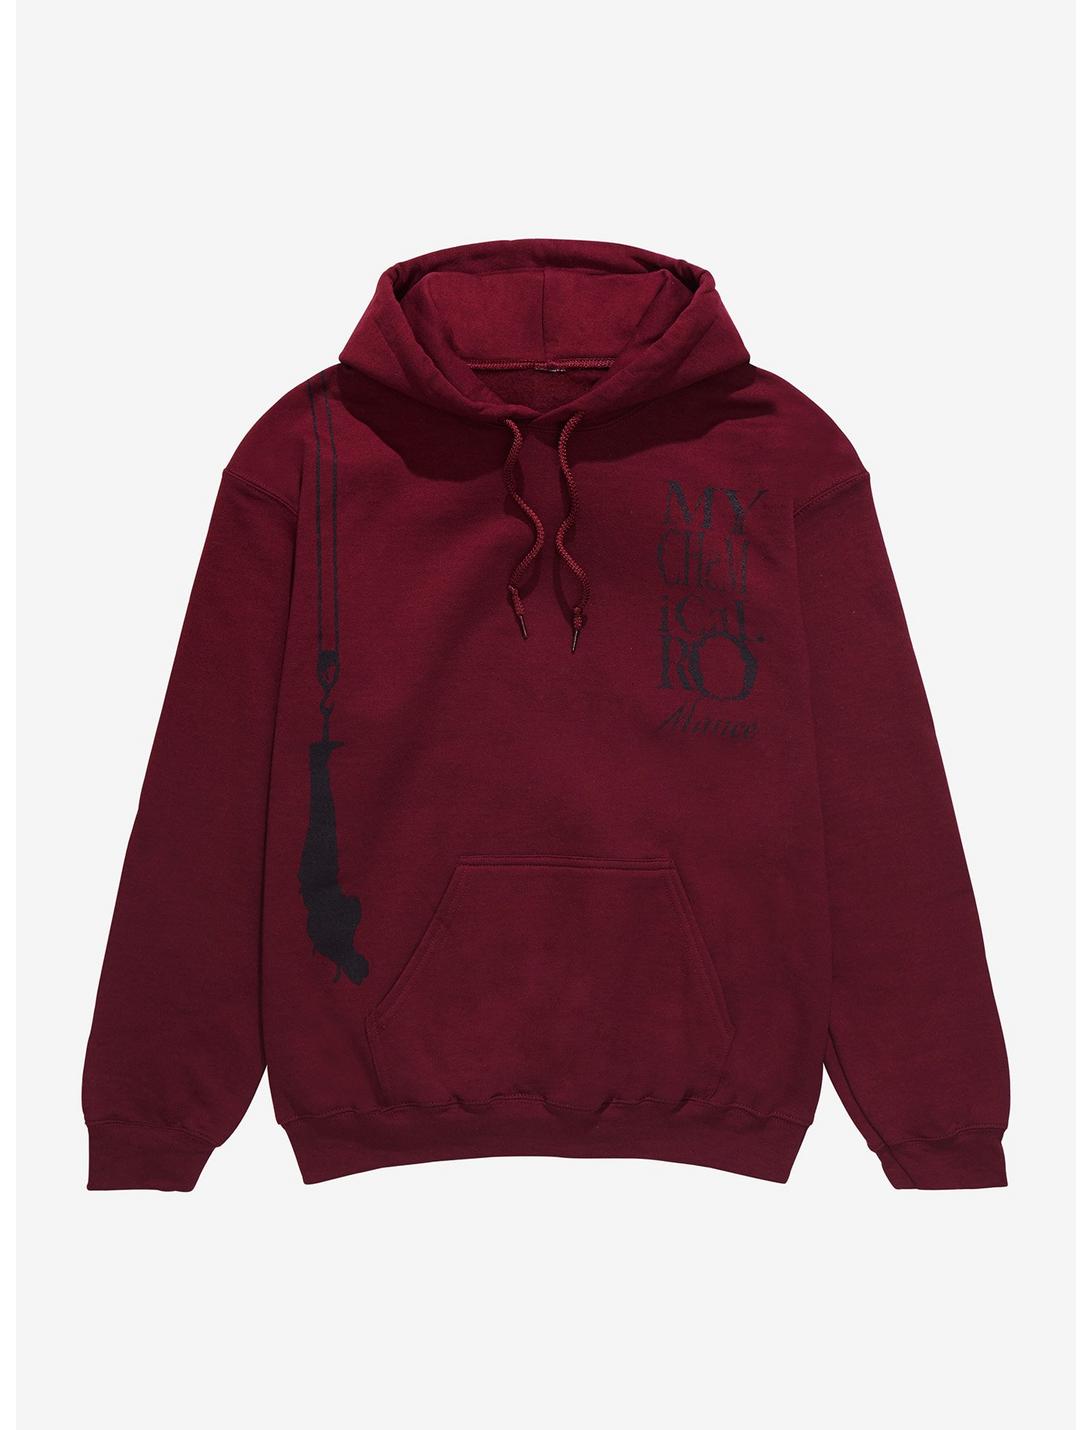 My Chemical Romance I Brought You My Bullets, You Brought Me Your Love Hoodie, BURGUNDY, hi-res